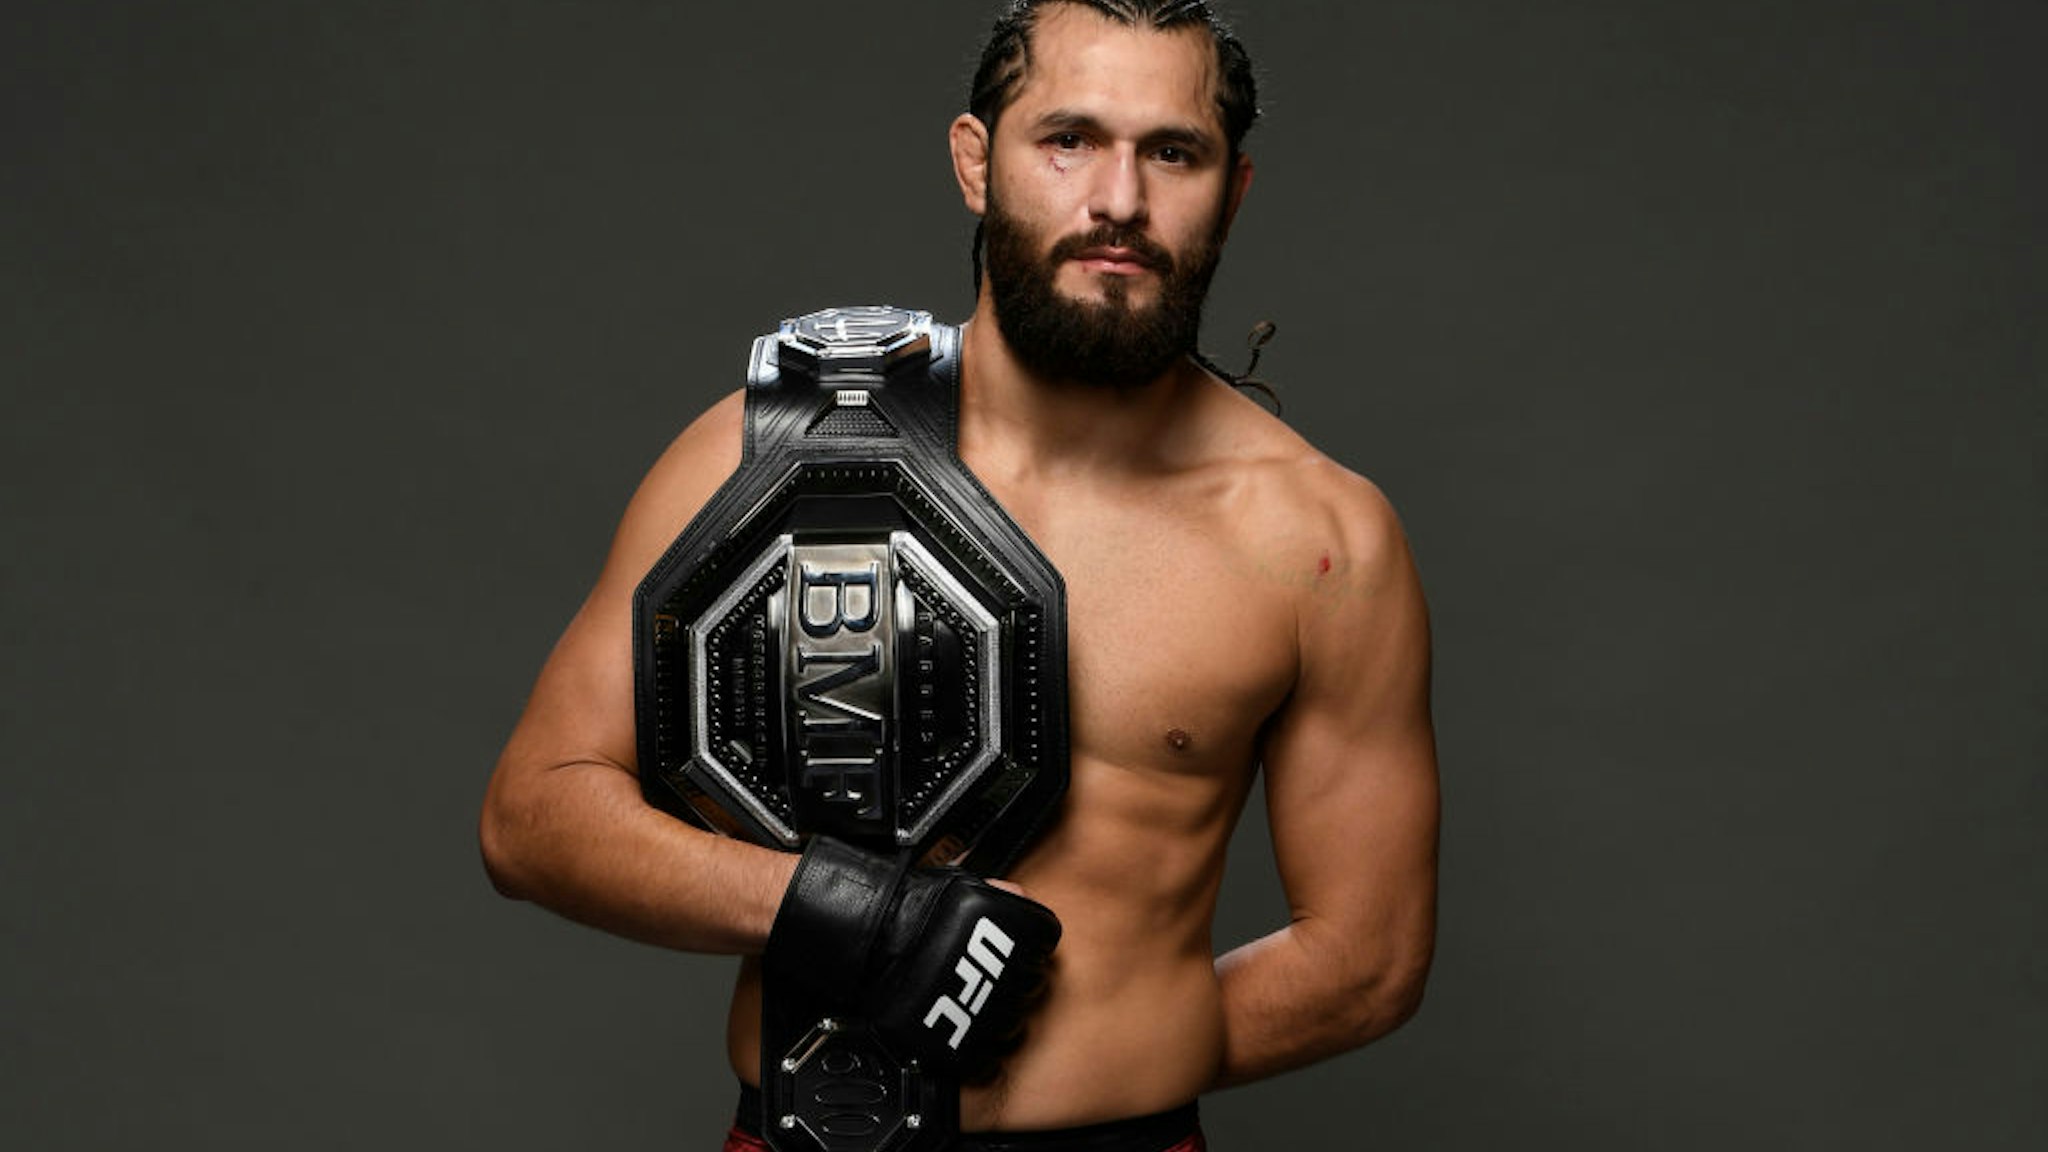 NEW YORK, NEW YORK - NOVEMBER 02: Jorge Masvidal poses for a portrait backstage during the UFC 244 event at Madison Square Garden on November 02, 2019 in New York City. (Photo by Mike Roach/Zuffa LLC via Getty Images)